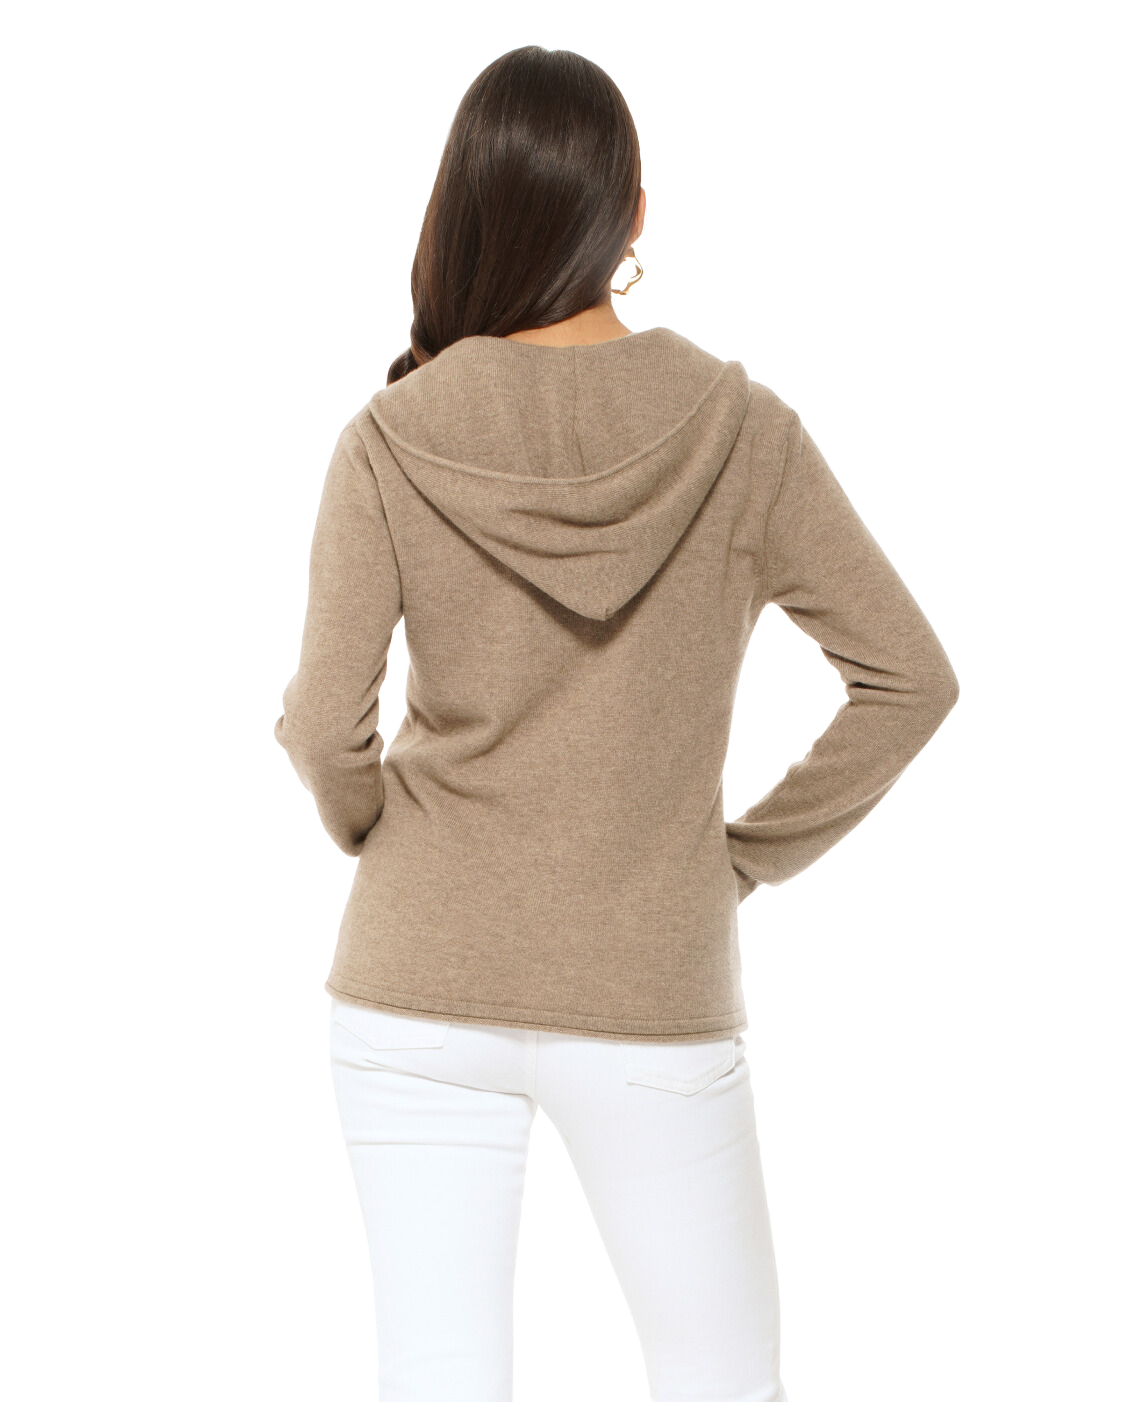 Monticelli Women's Pure Cashmere Hoodie Sweater Camel  4